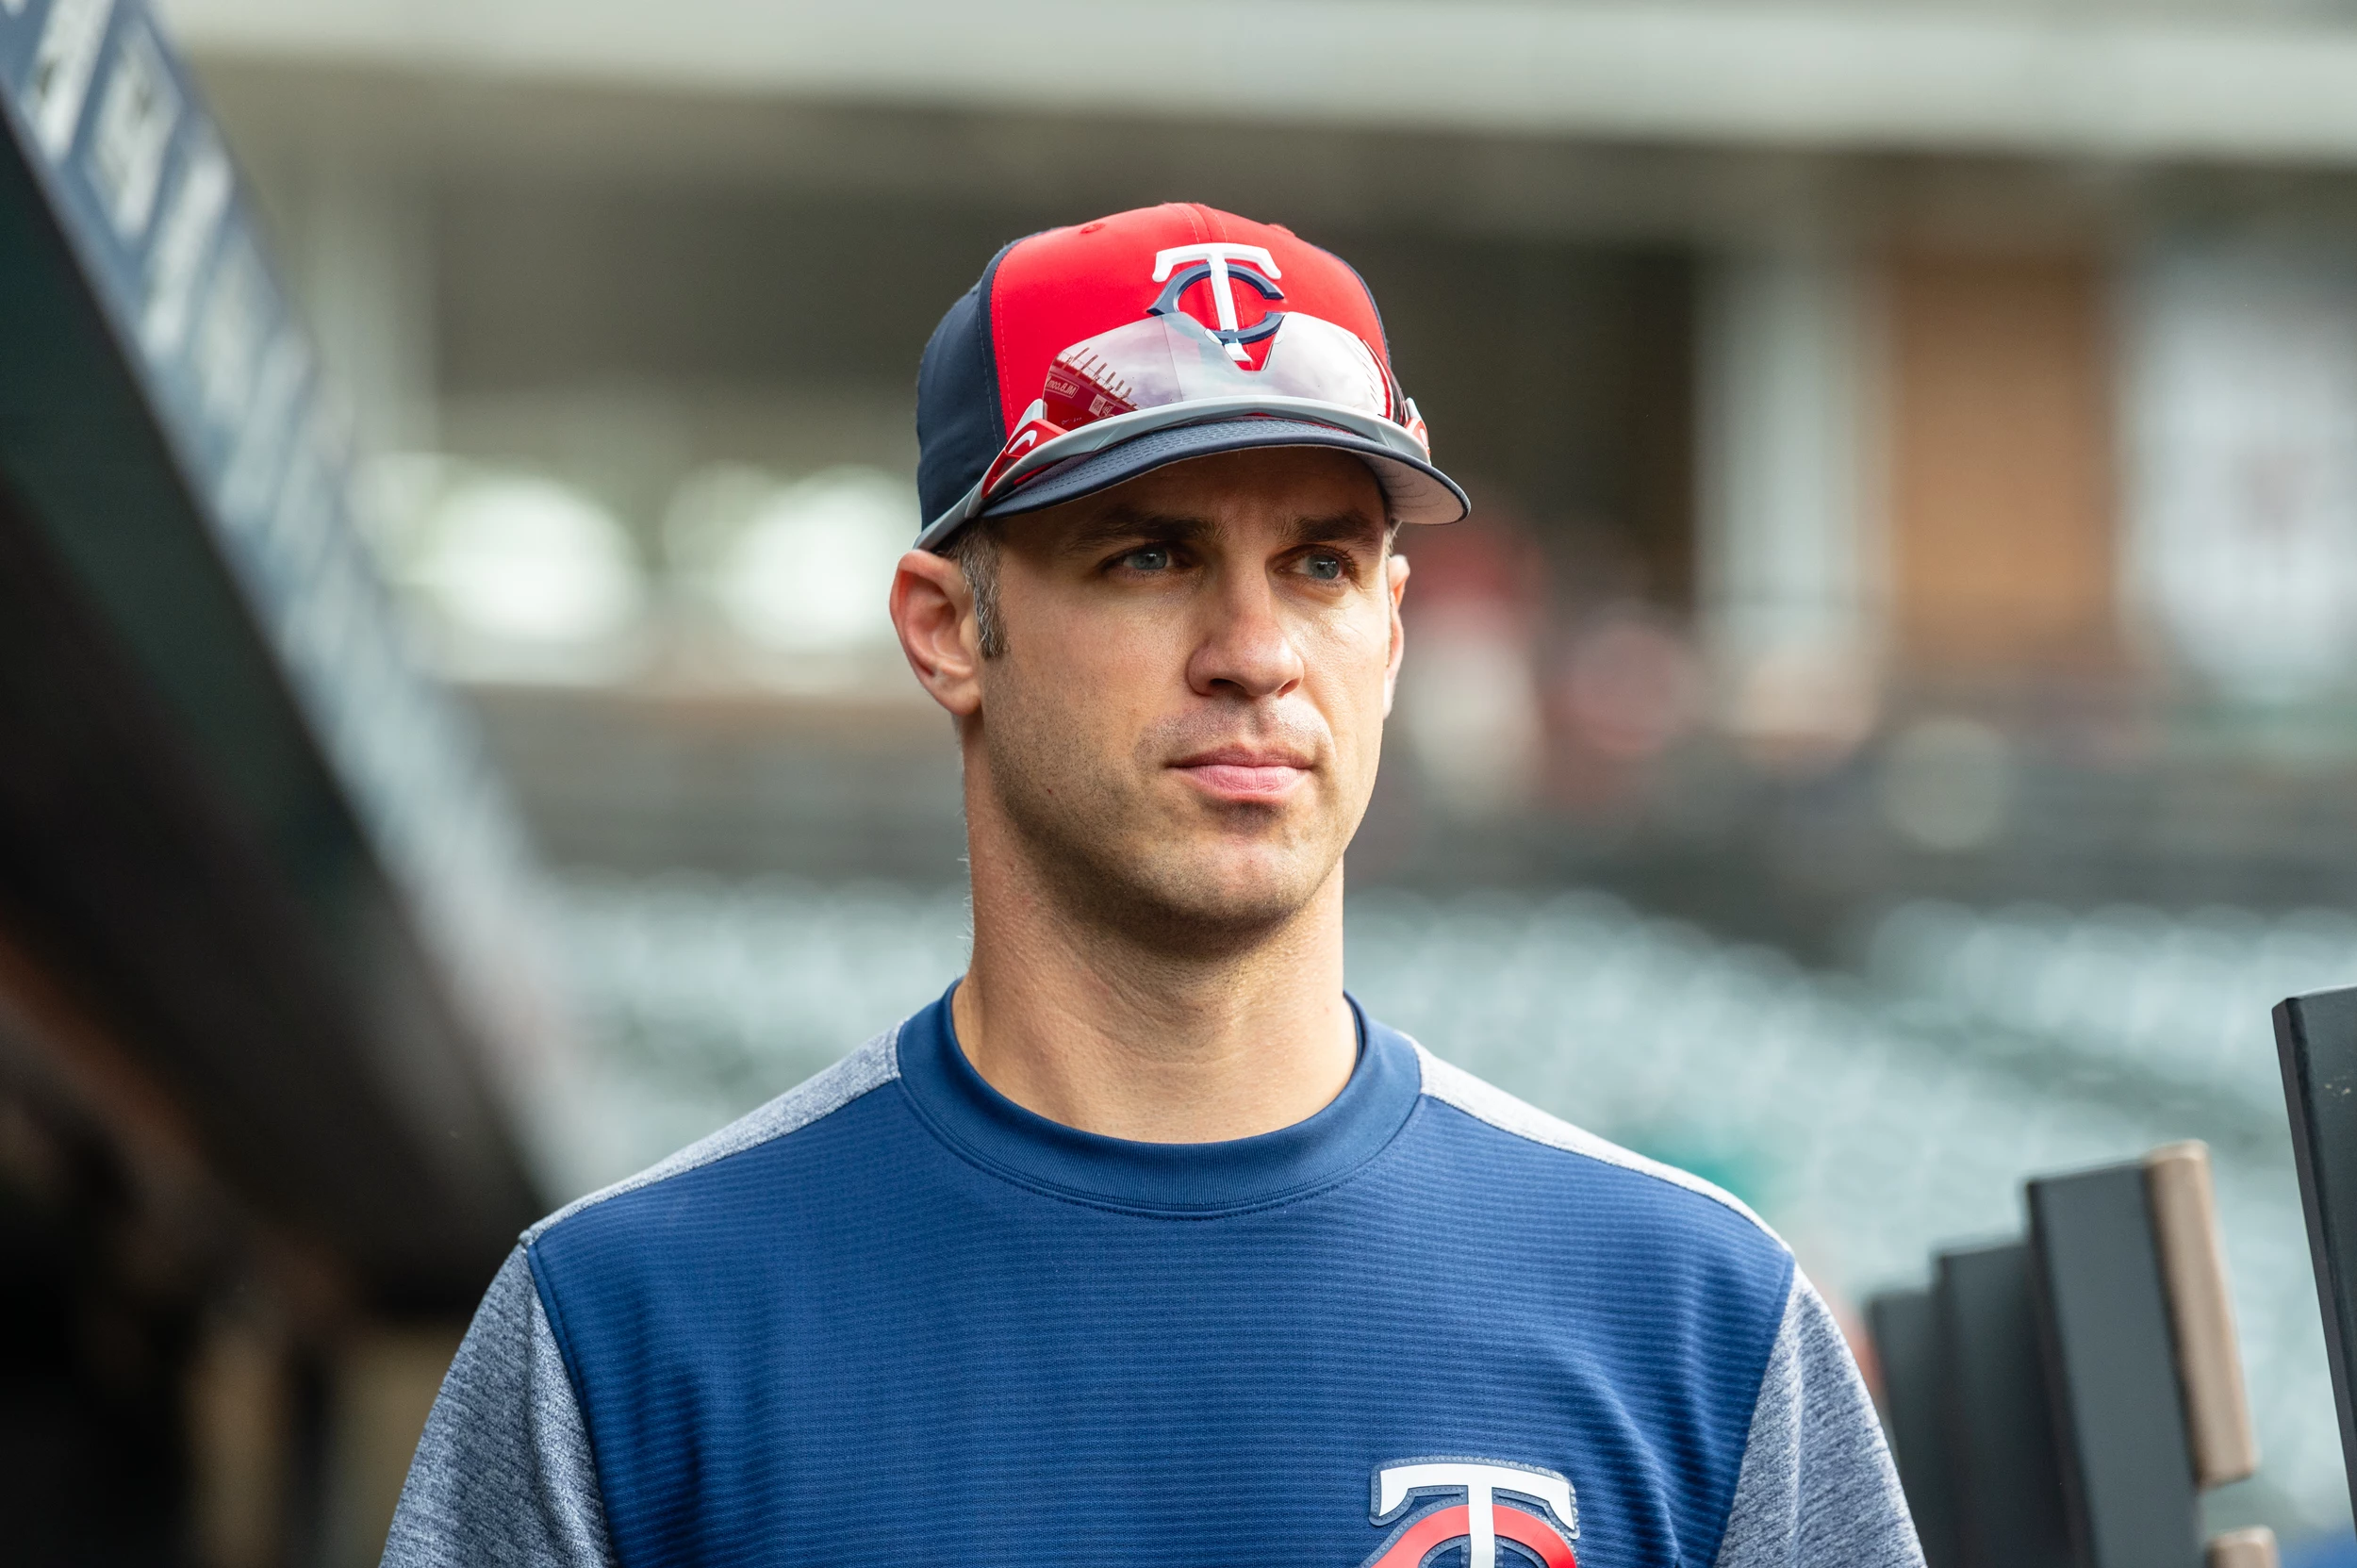 Joe Mauer retires after 15 seasons with the Twins